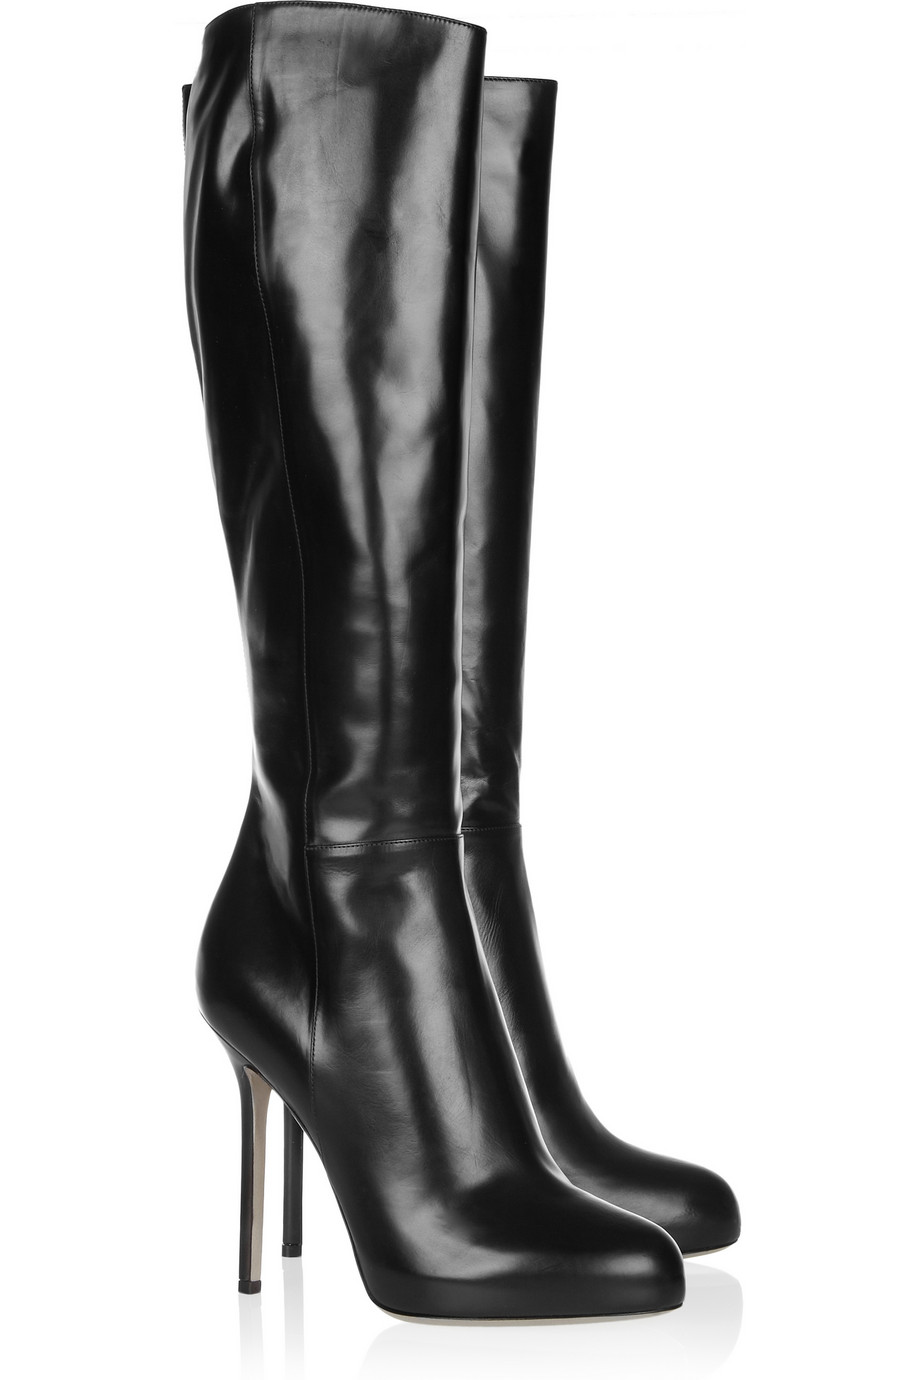 womens leather boots lastest both styles, for men and women, sell for $95 next month he liked RLWGFQL